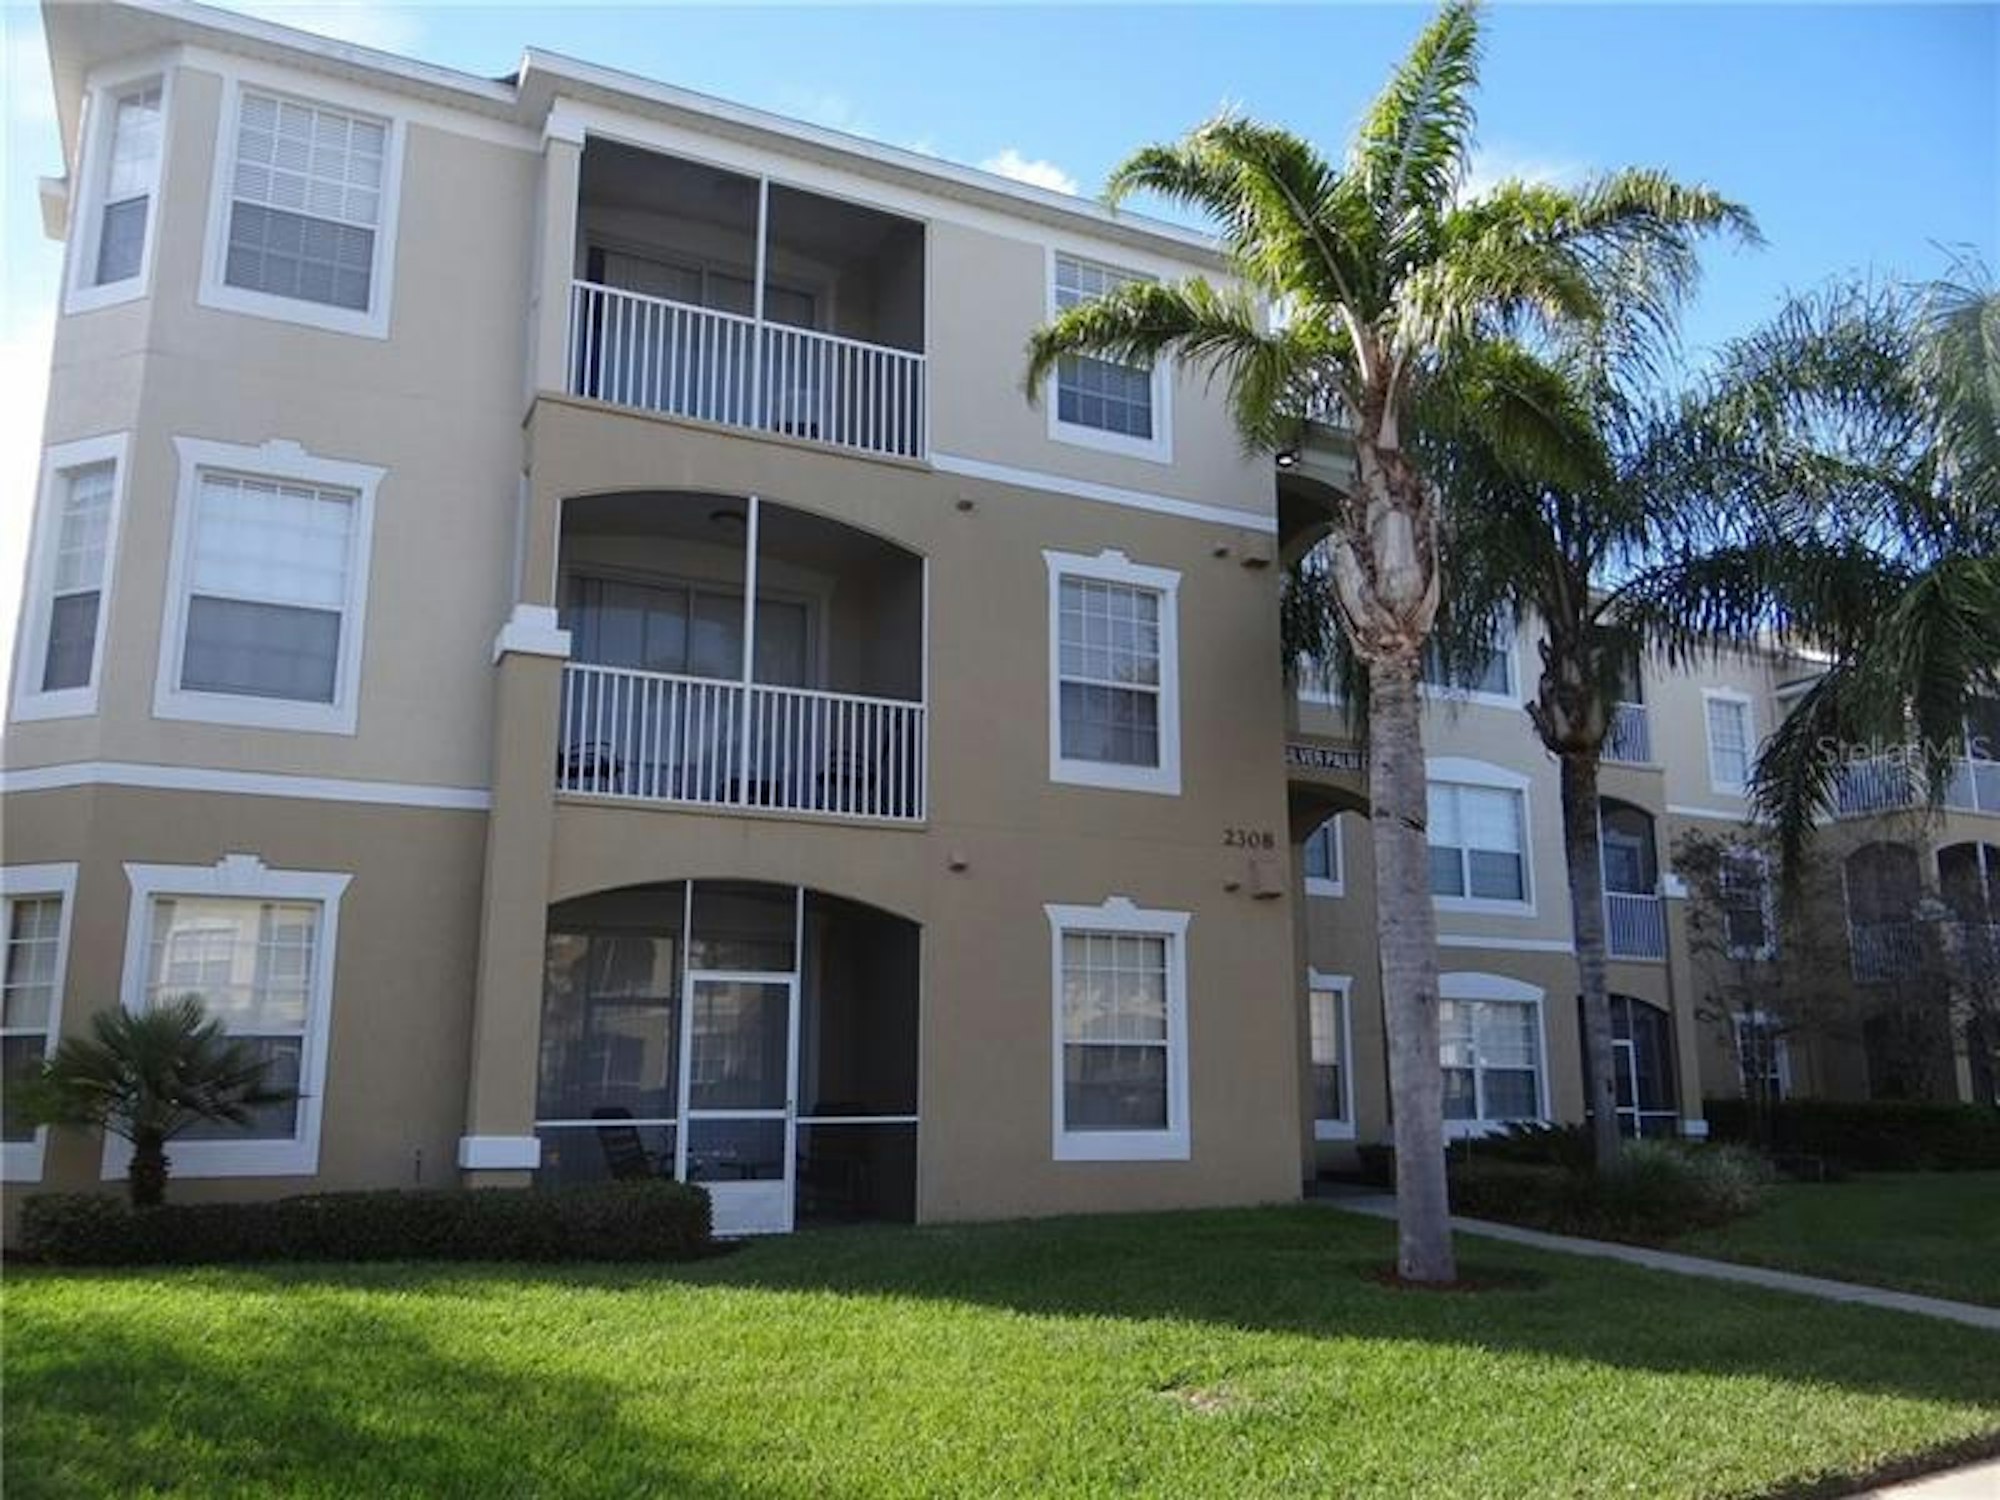 Photo 1 of 25 - 2308 Silver Palm Dr #302, Kissimmee, FL 34747